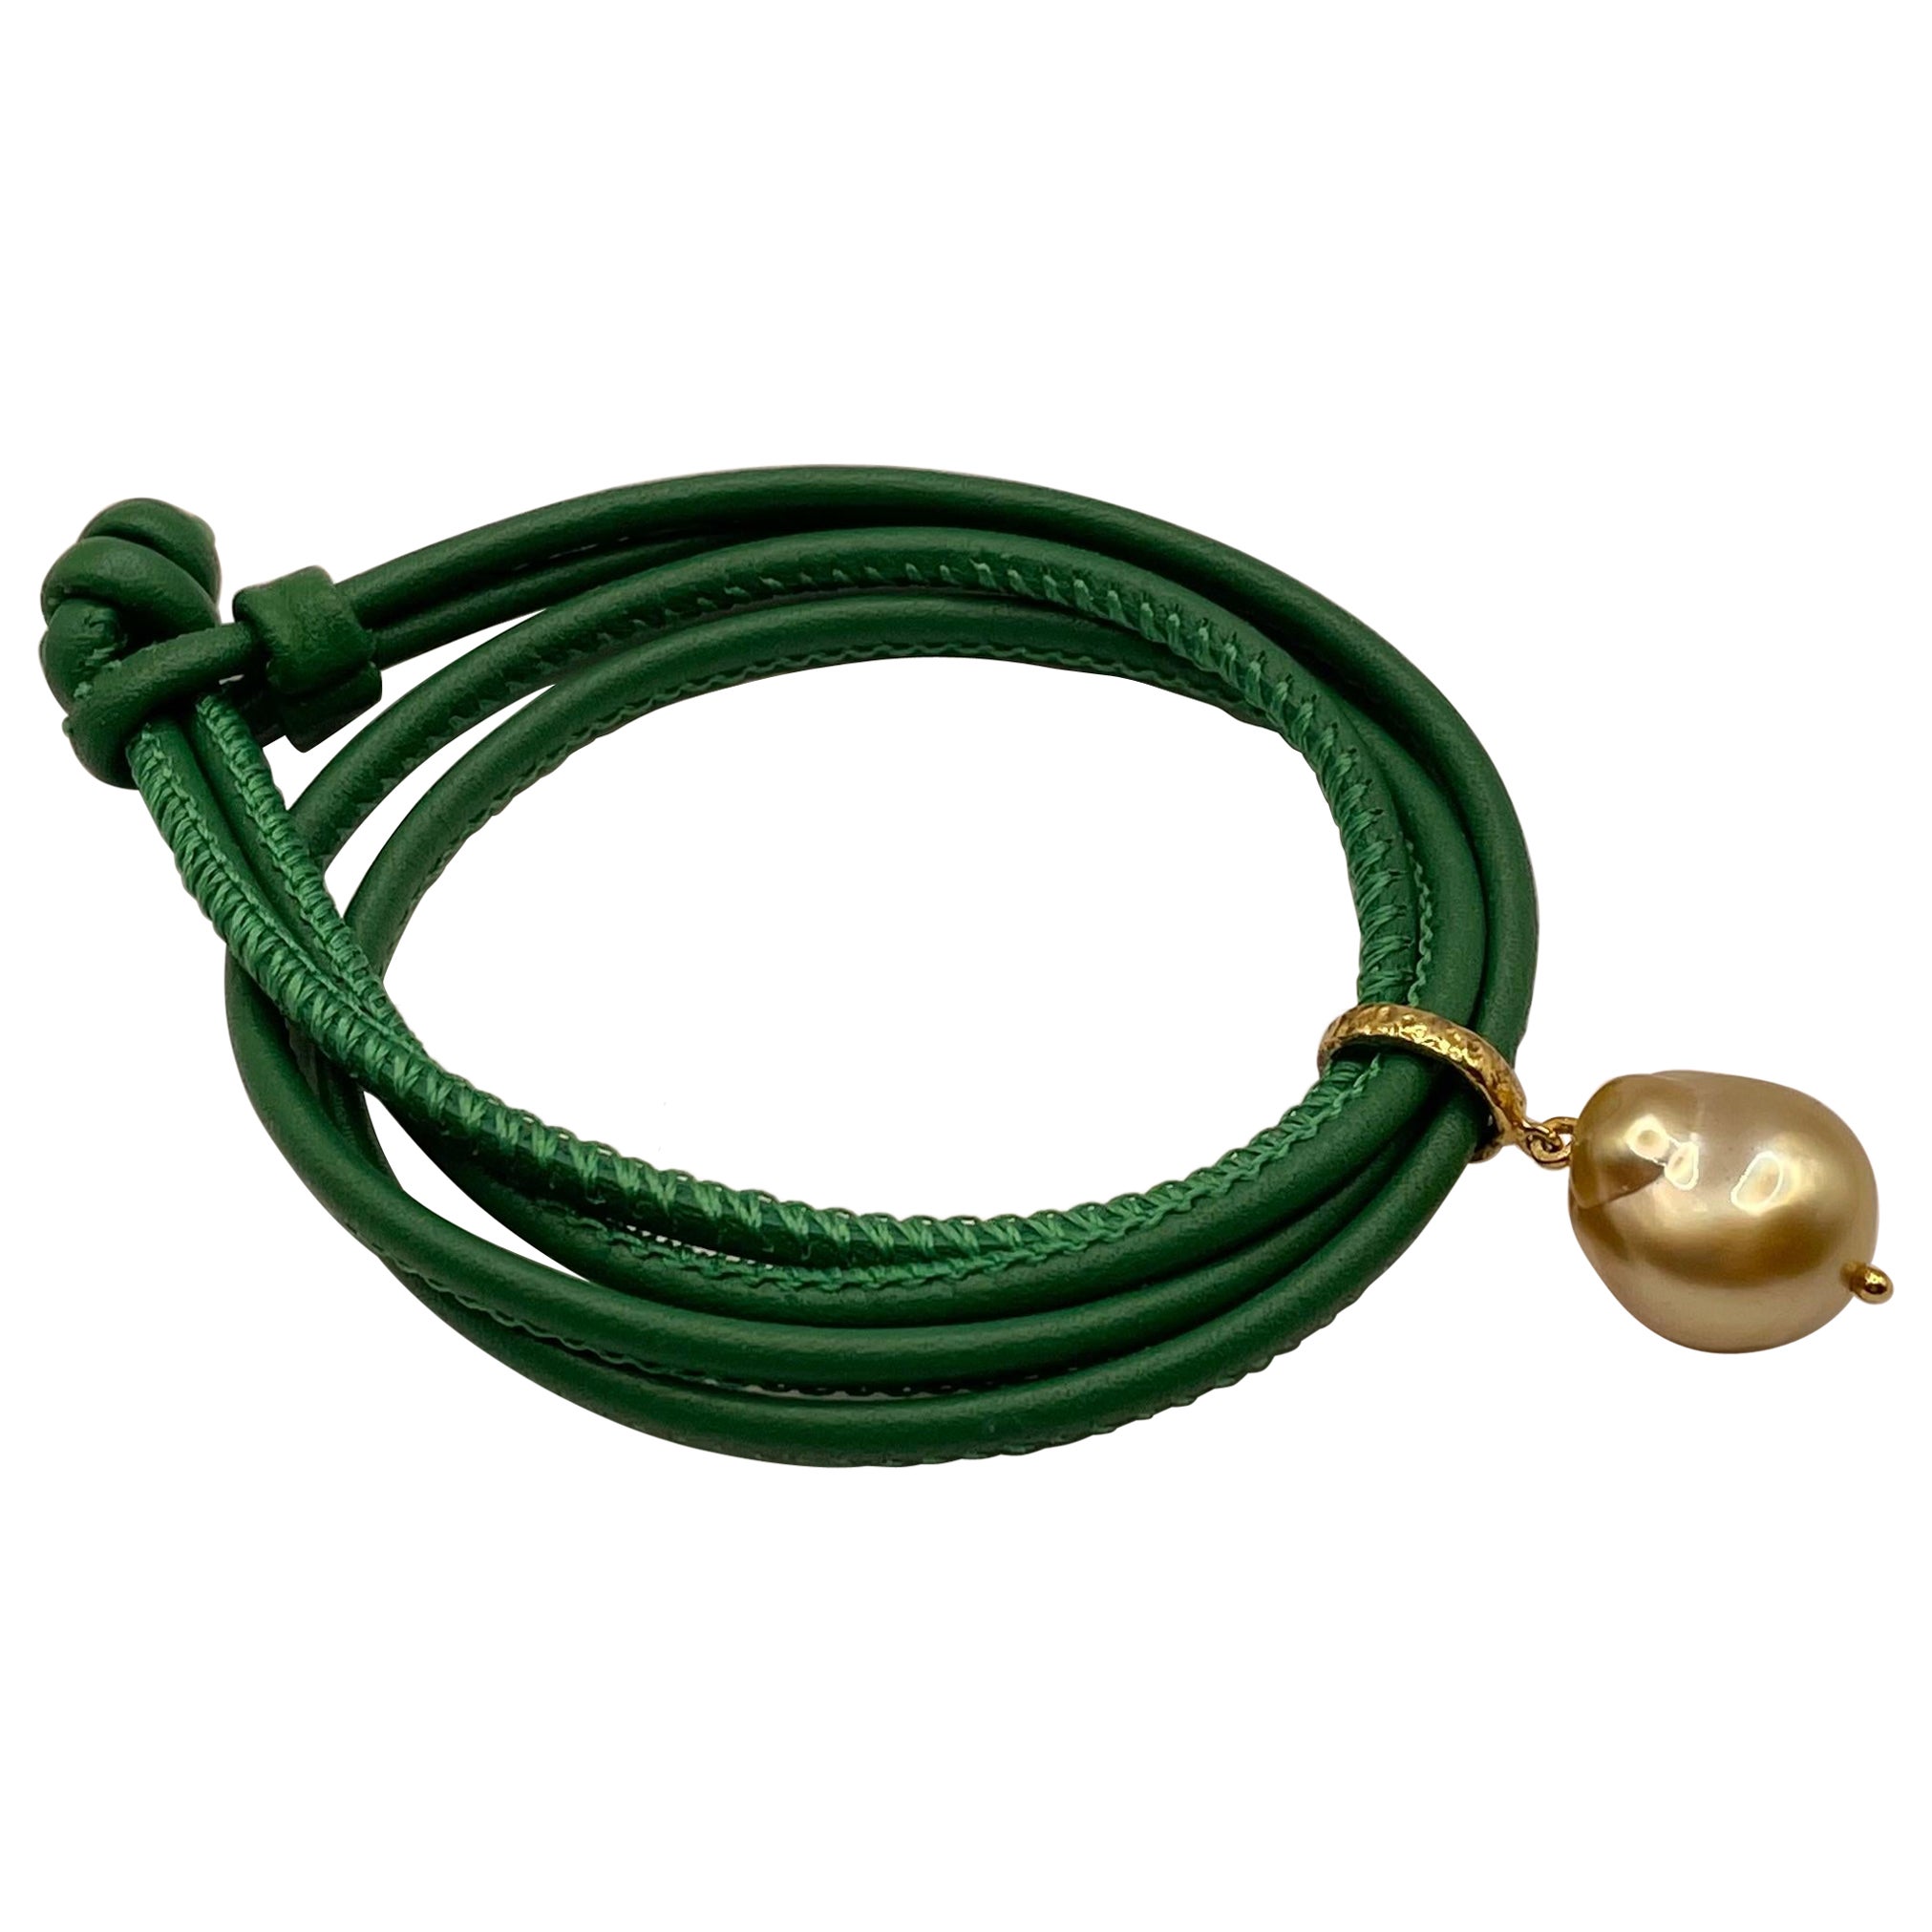 Yellow South Sea Pearl and Green Leather Bracelet by Julia Shlovsky